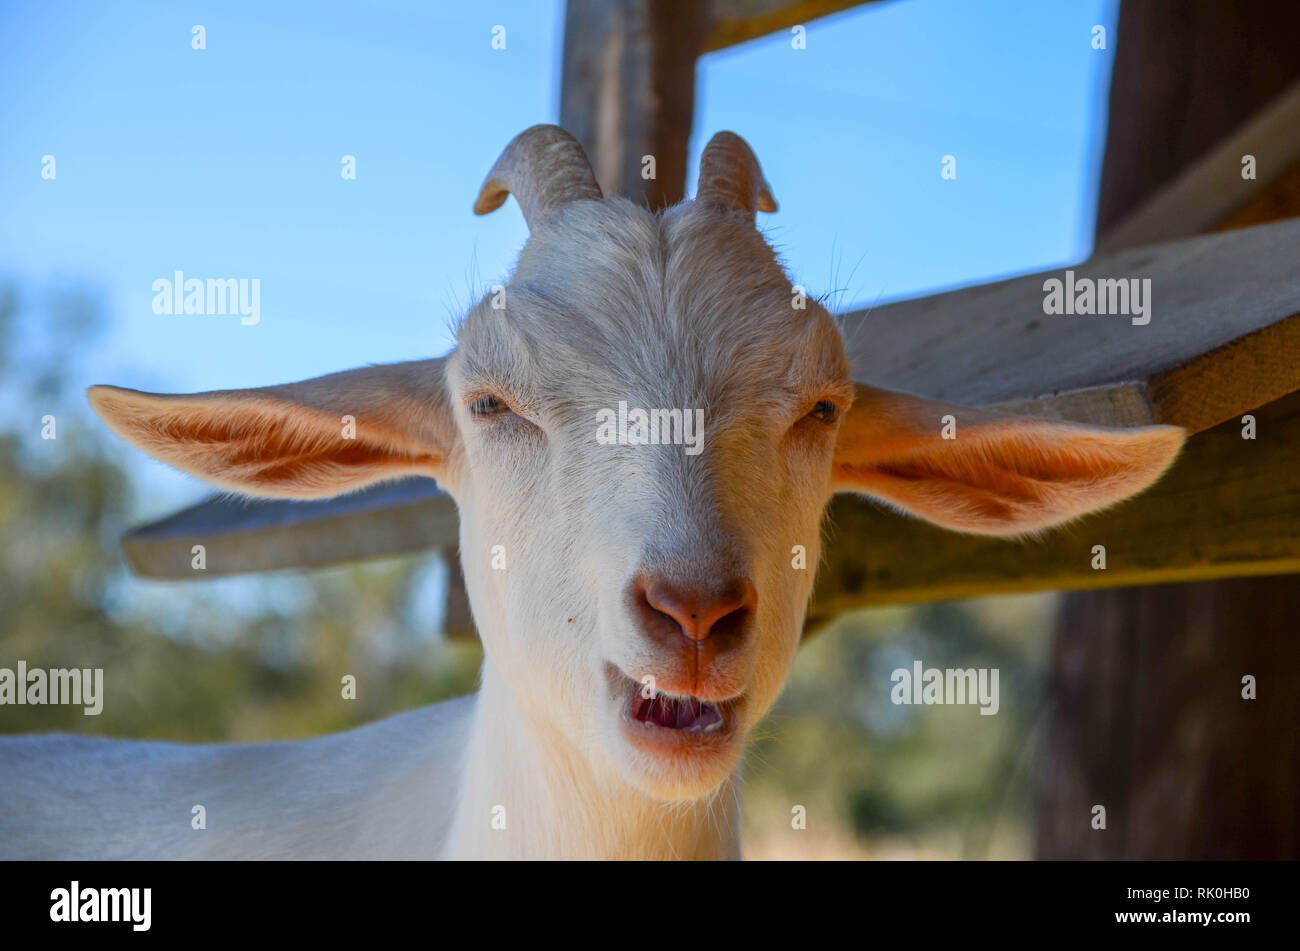 The head of a Billy goat Stock Photo